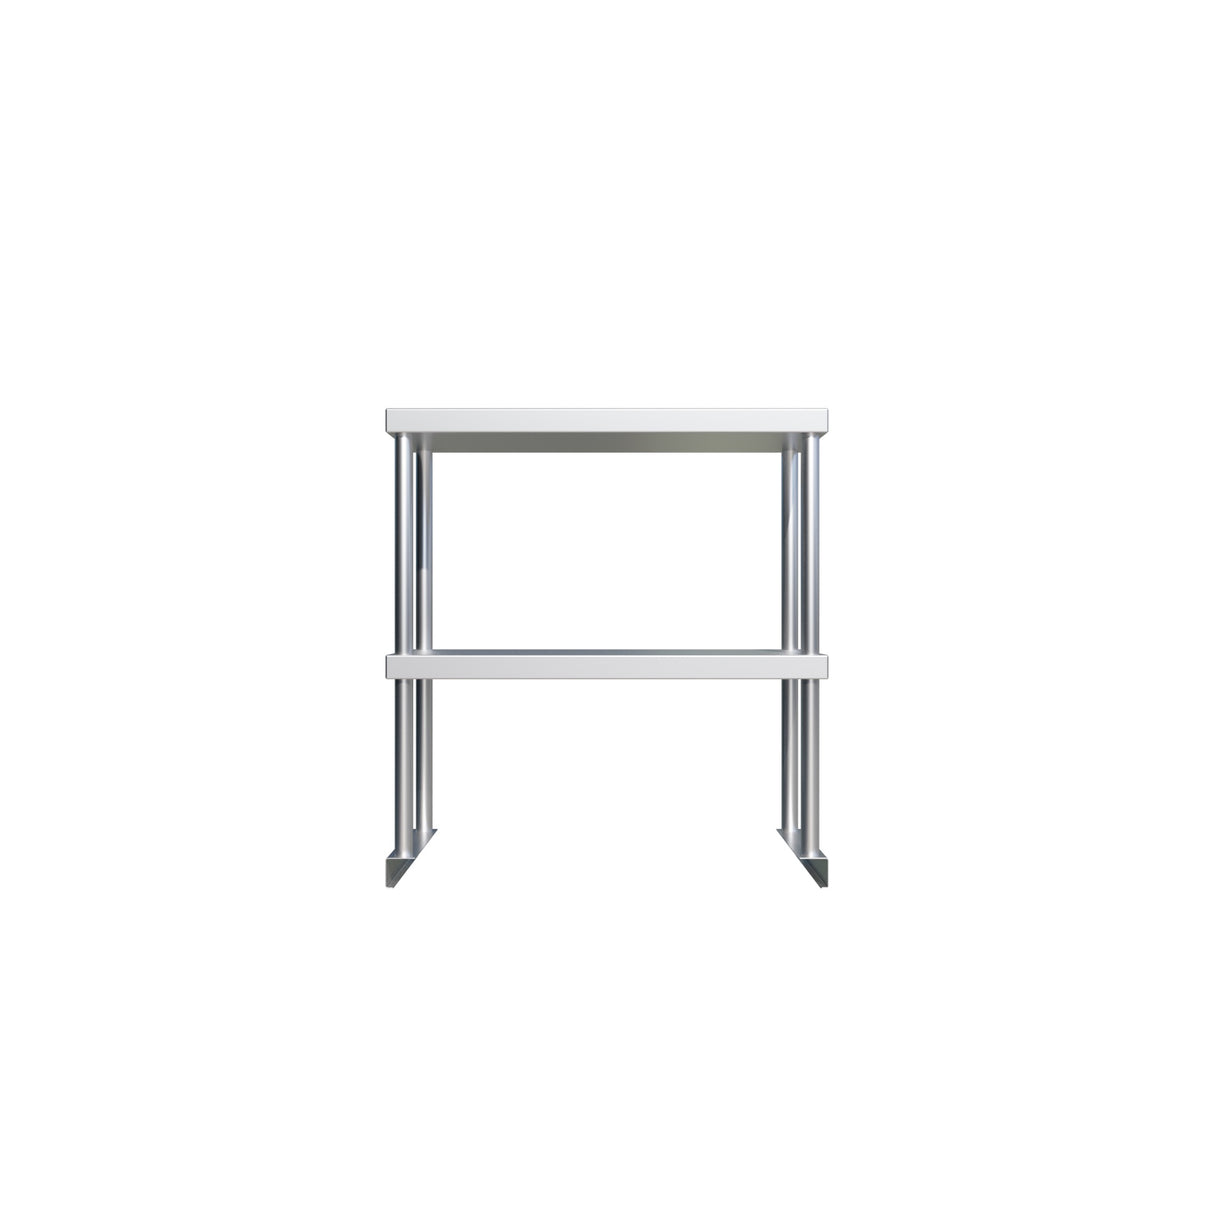 Empire Stainless Steel Double Over Shelf 600mm Wide - OSD-600